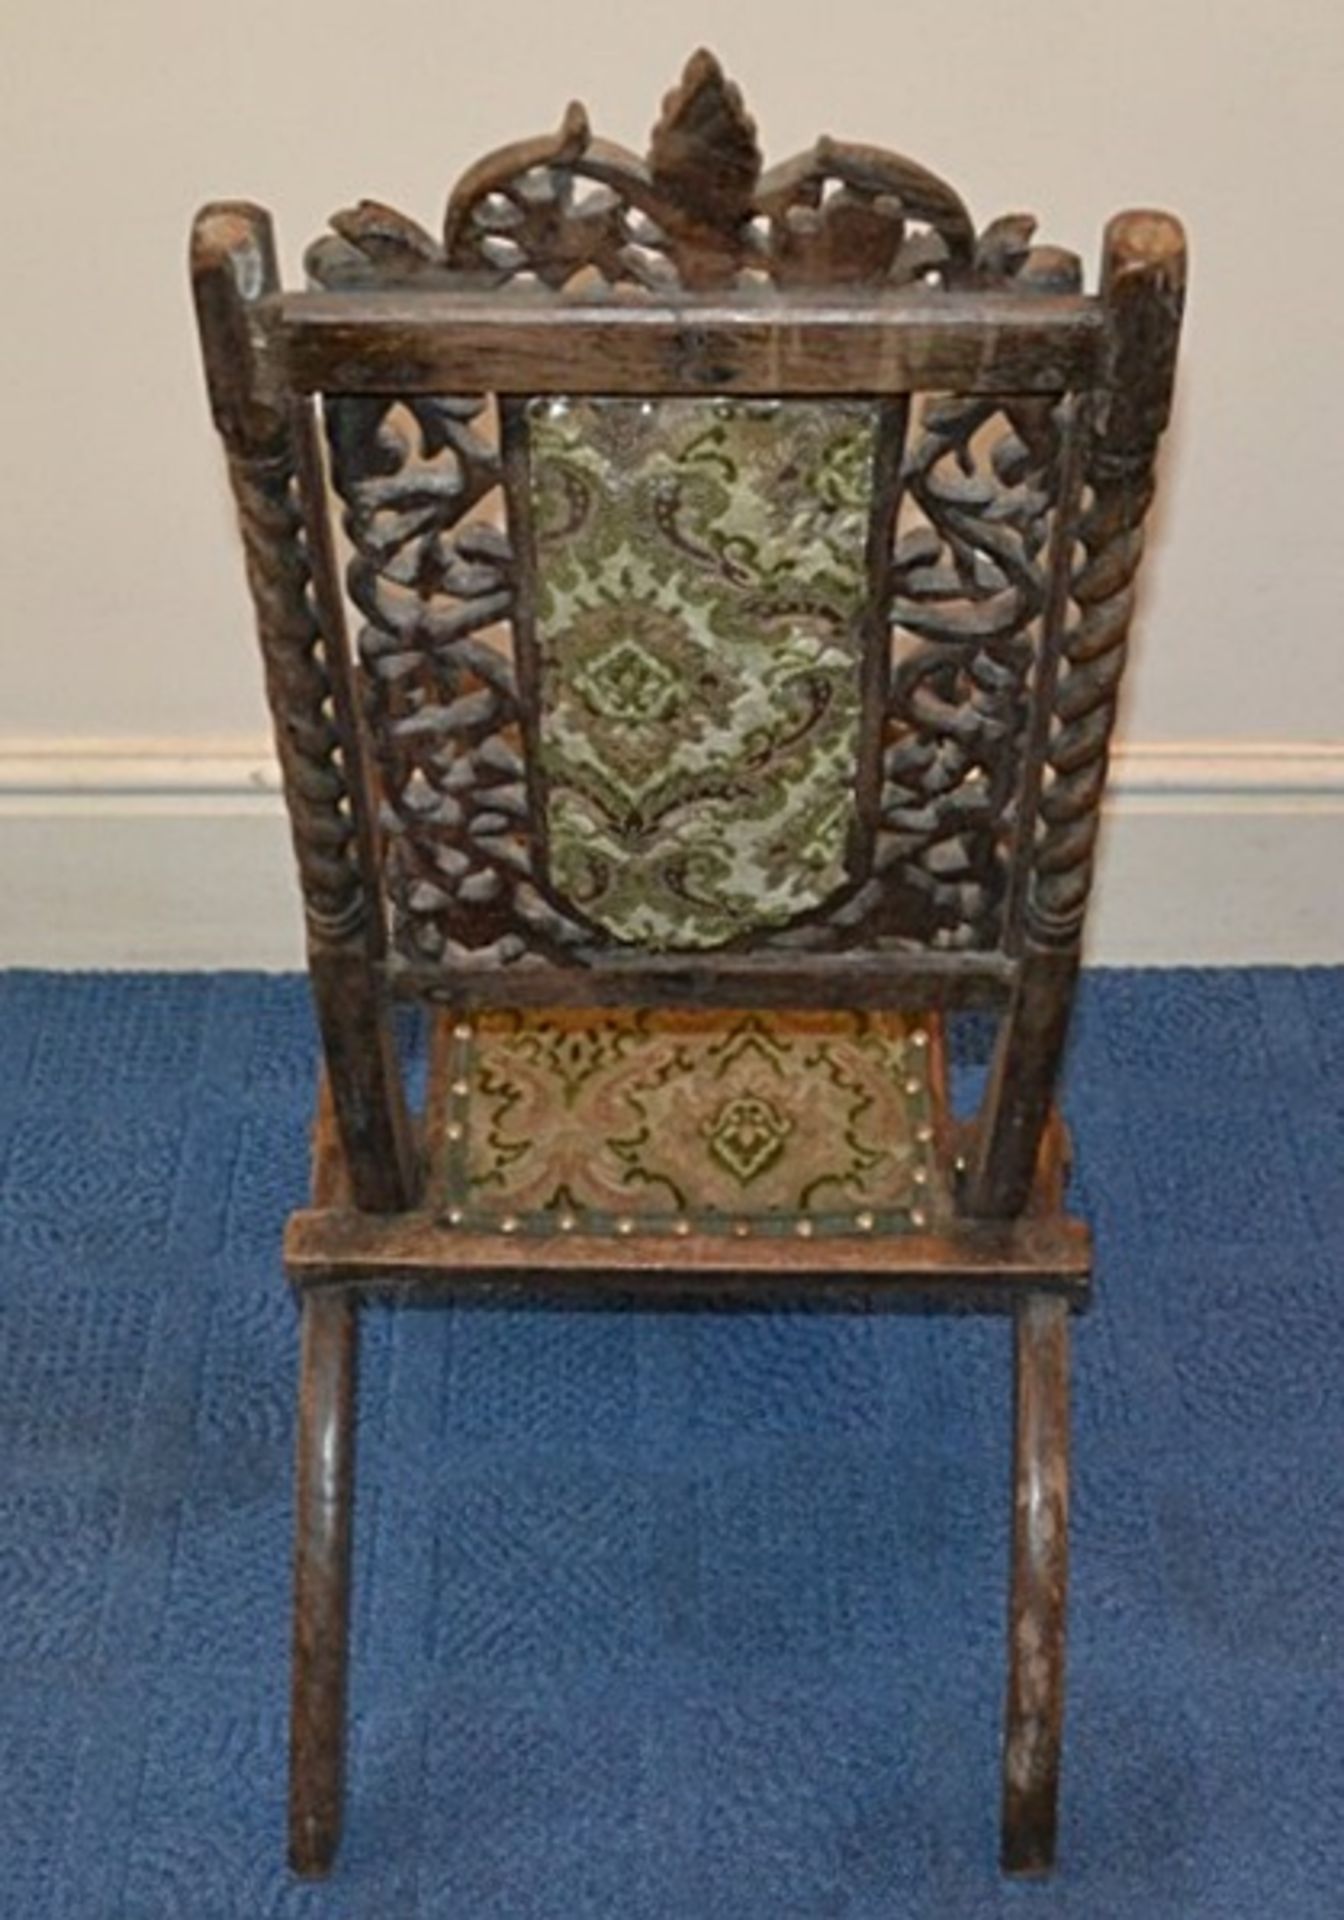 1 x Antique Victorian Upholstered Folding Chair - From A Grade II Listed Hall In Good Original - Image 4 of 7